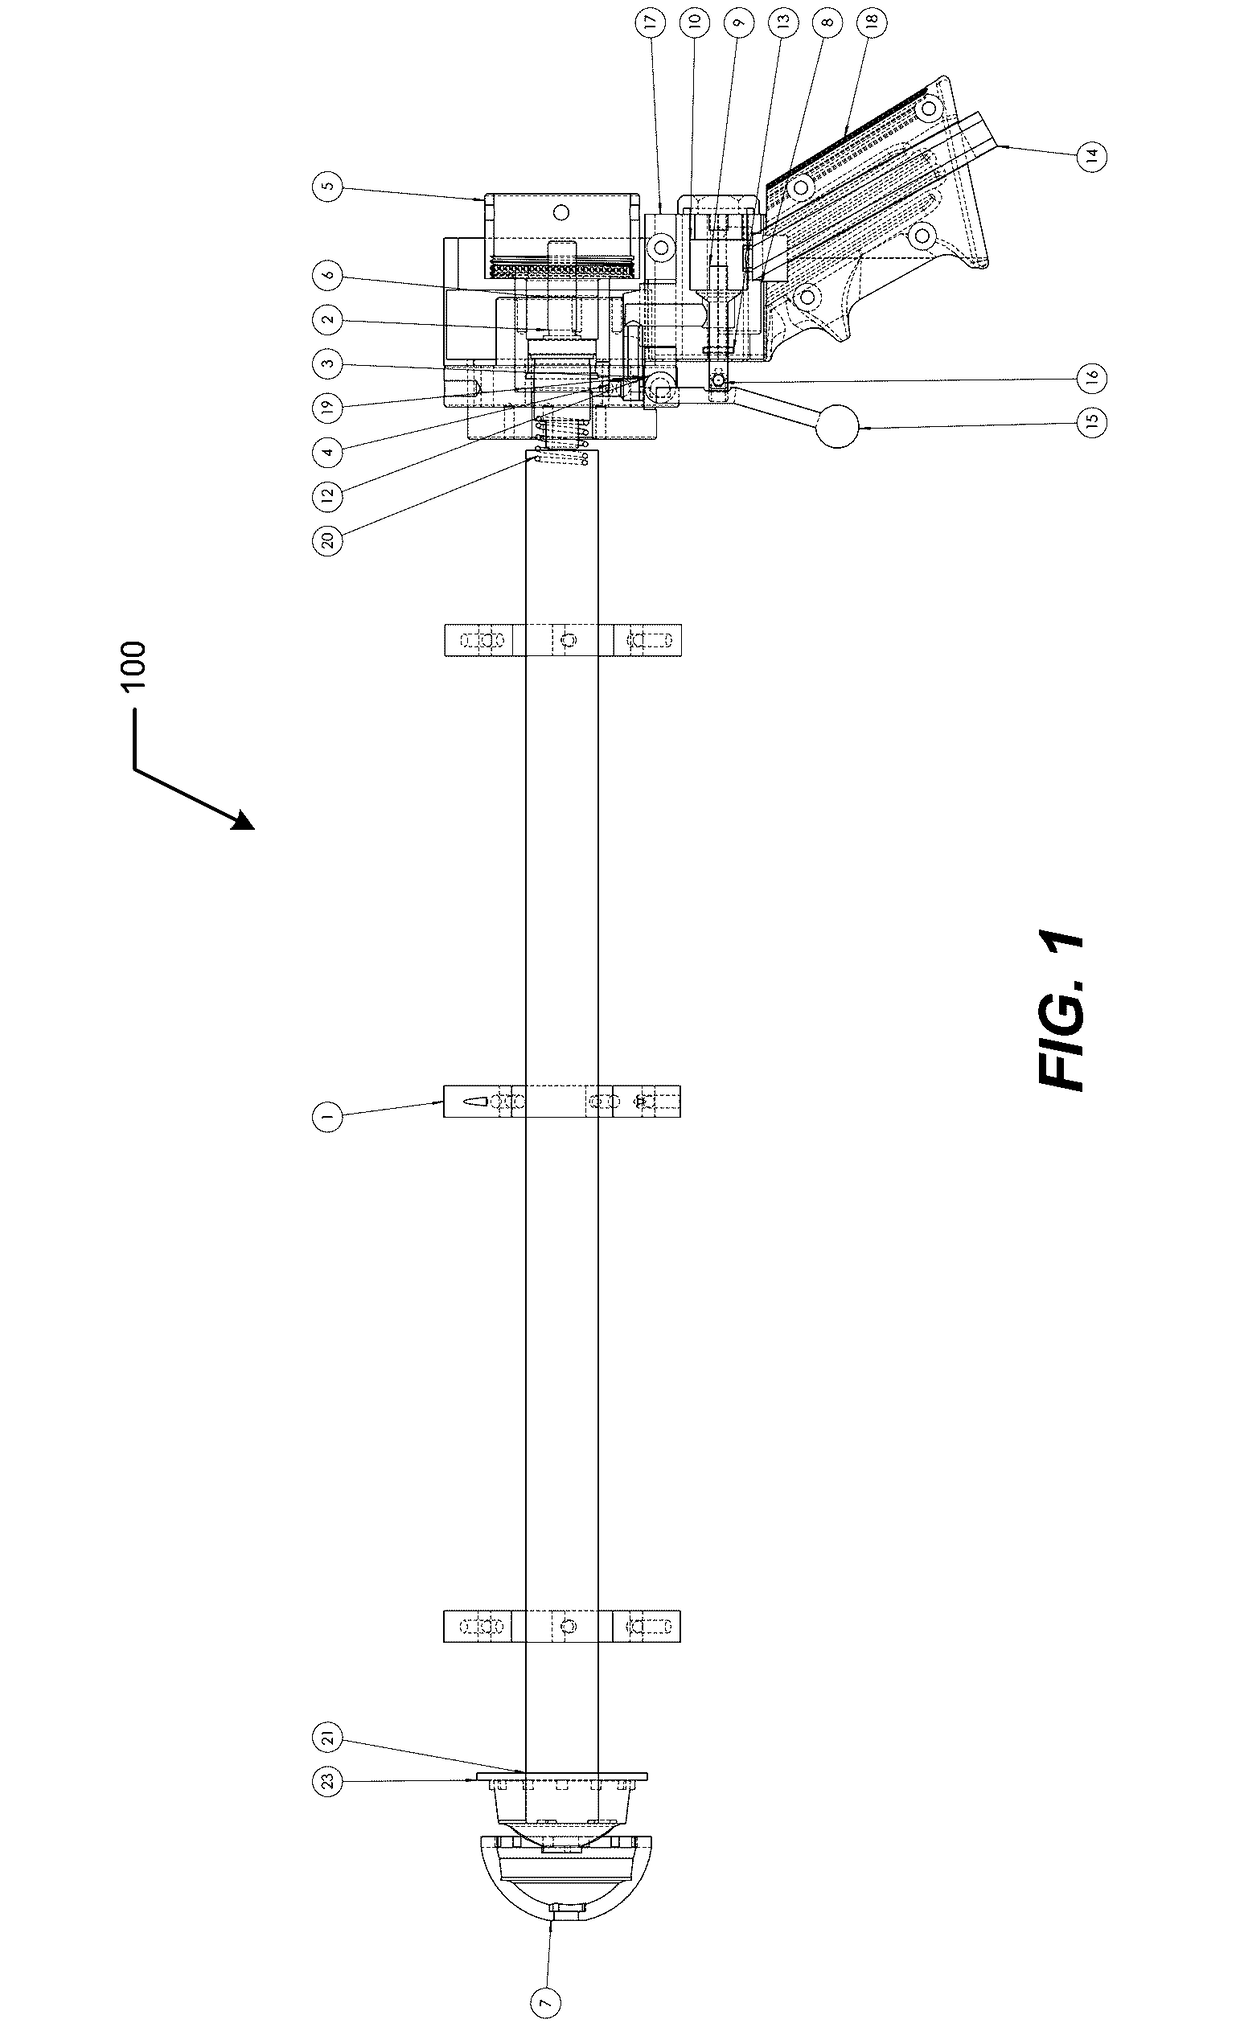 Prosthesis installation systems and methods